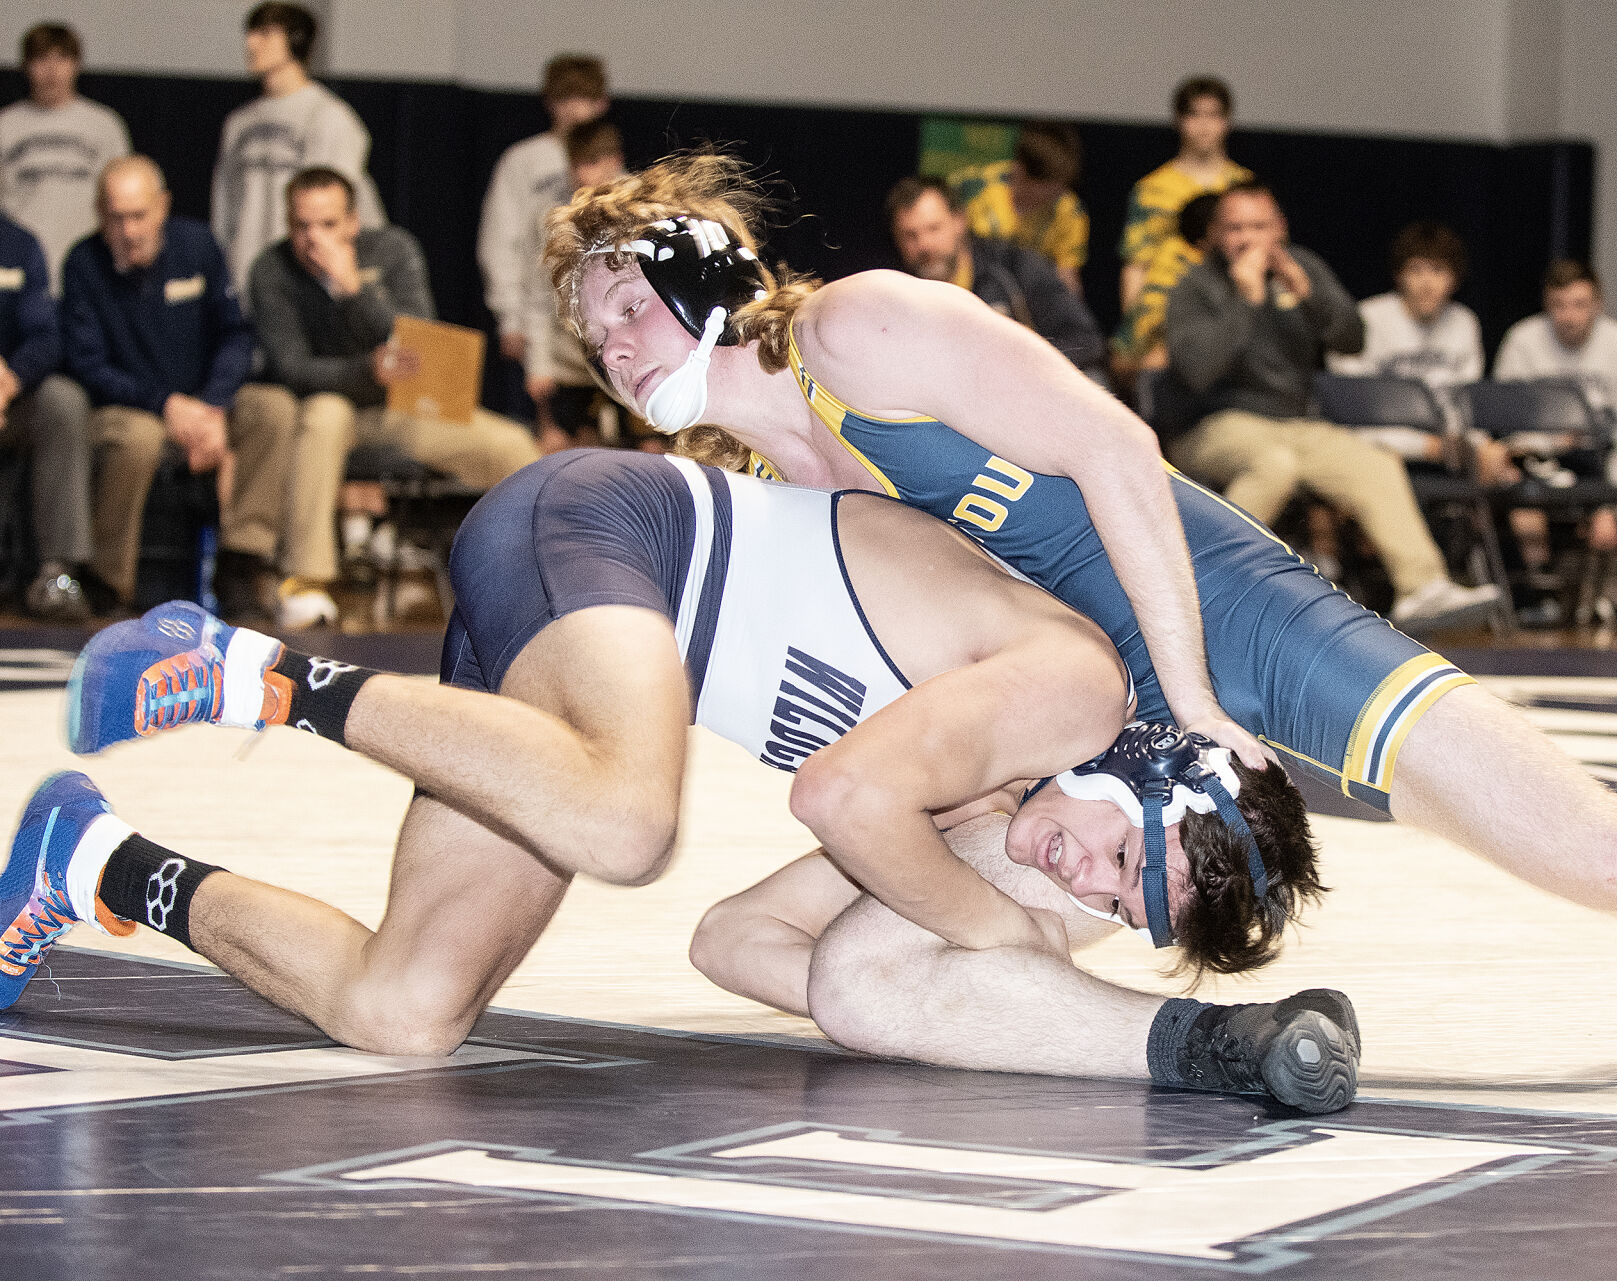 Montoursville Dominates Mifflinburg in Wrestling Dual Meet with Strong Pins and Major Decisions